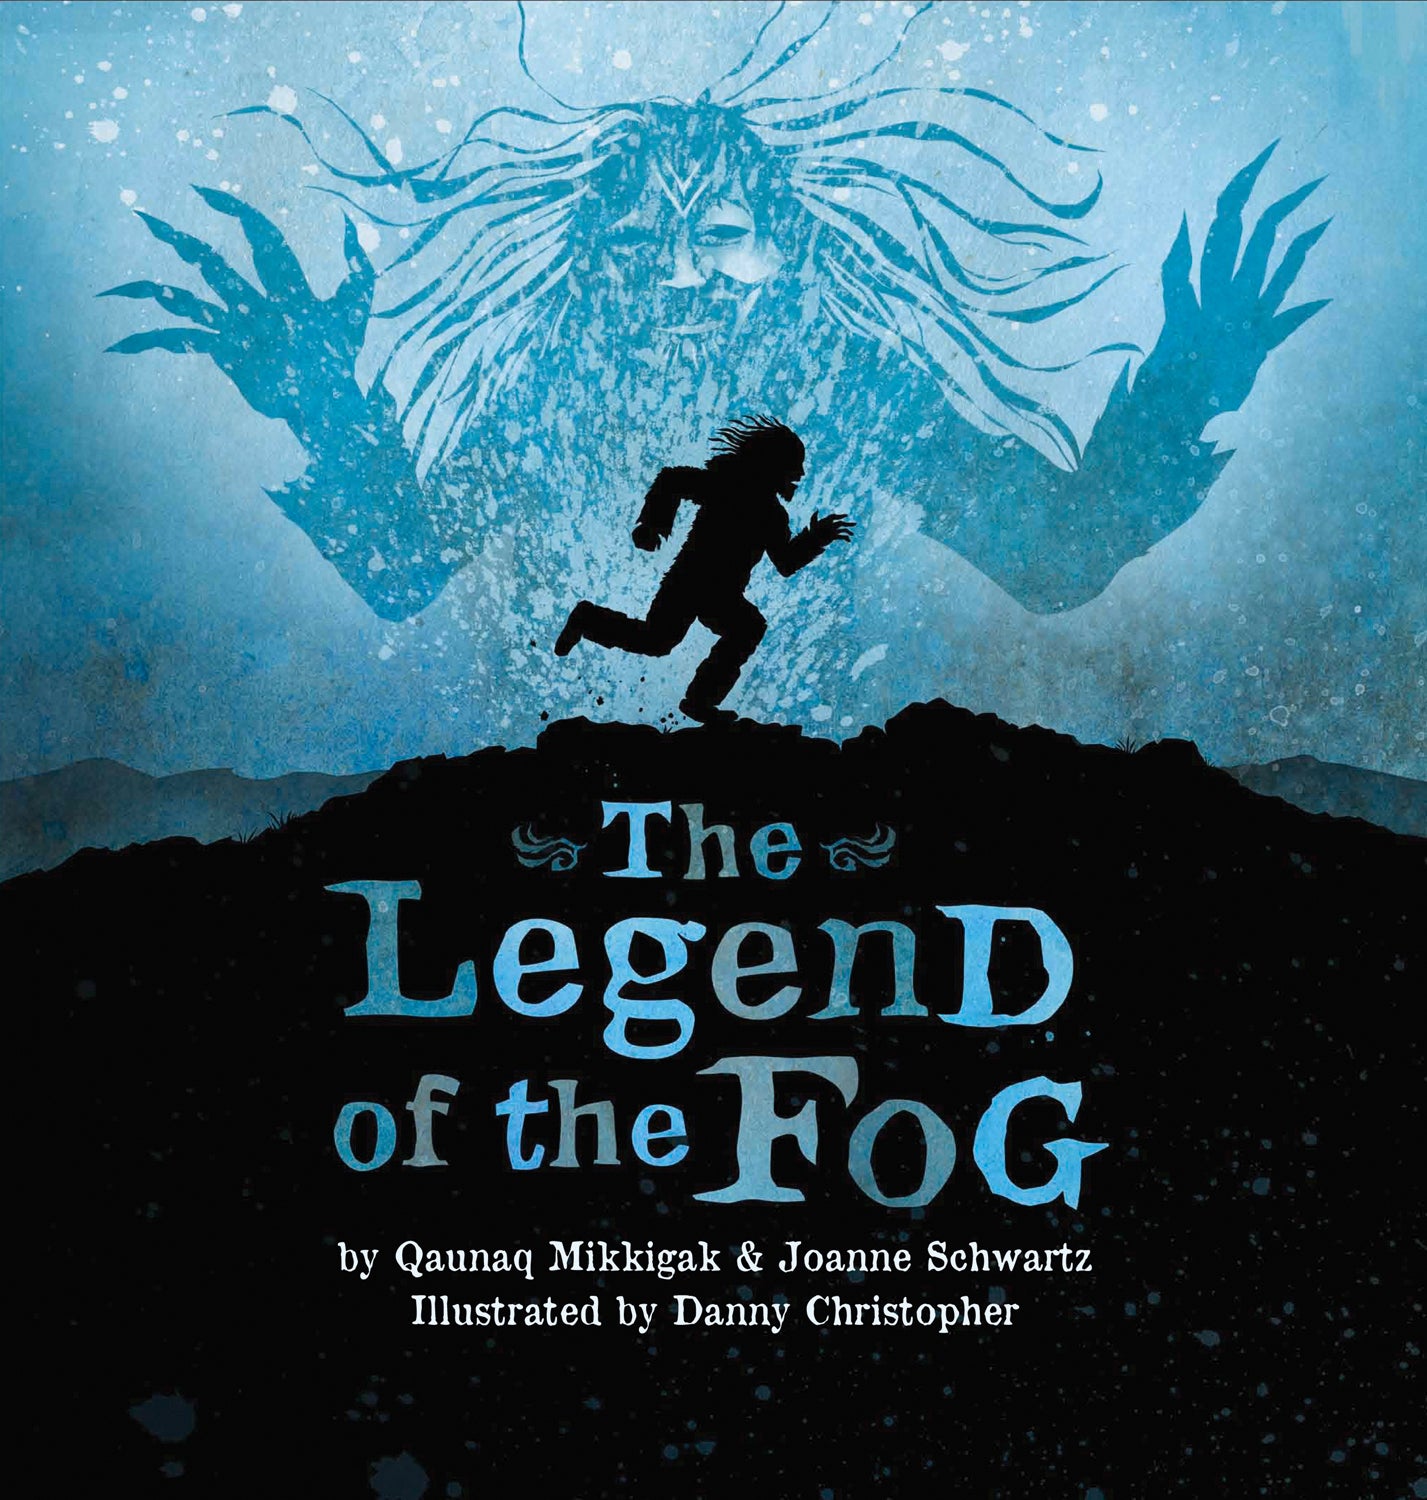 Legend of the Fog, The